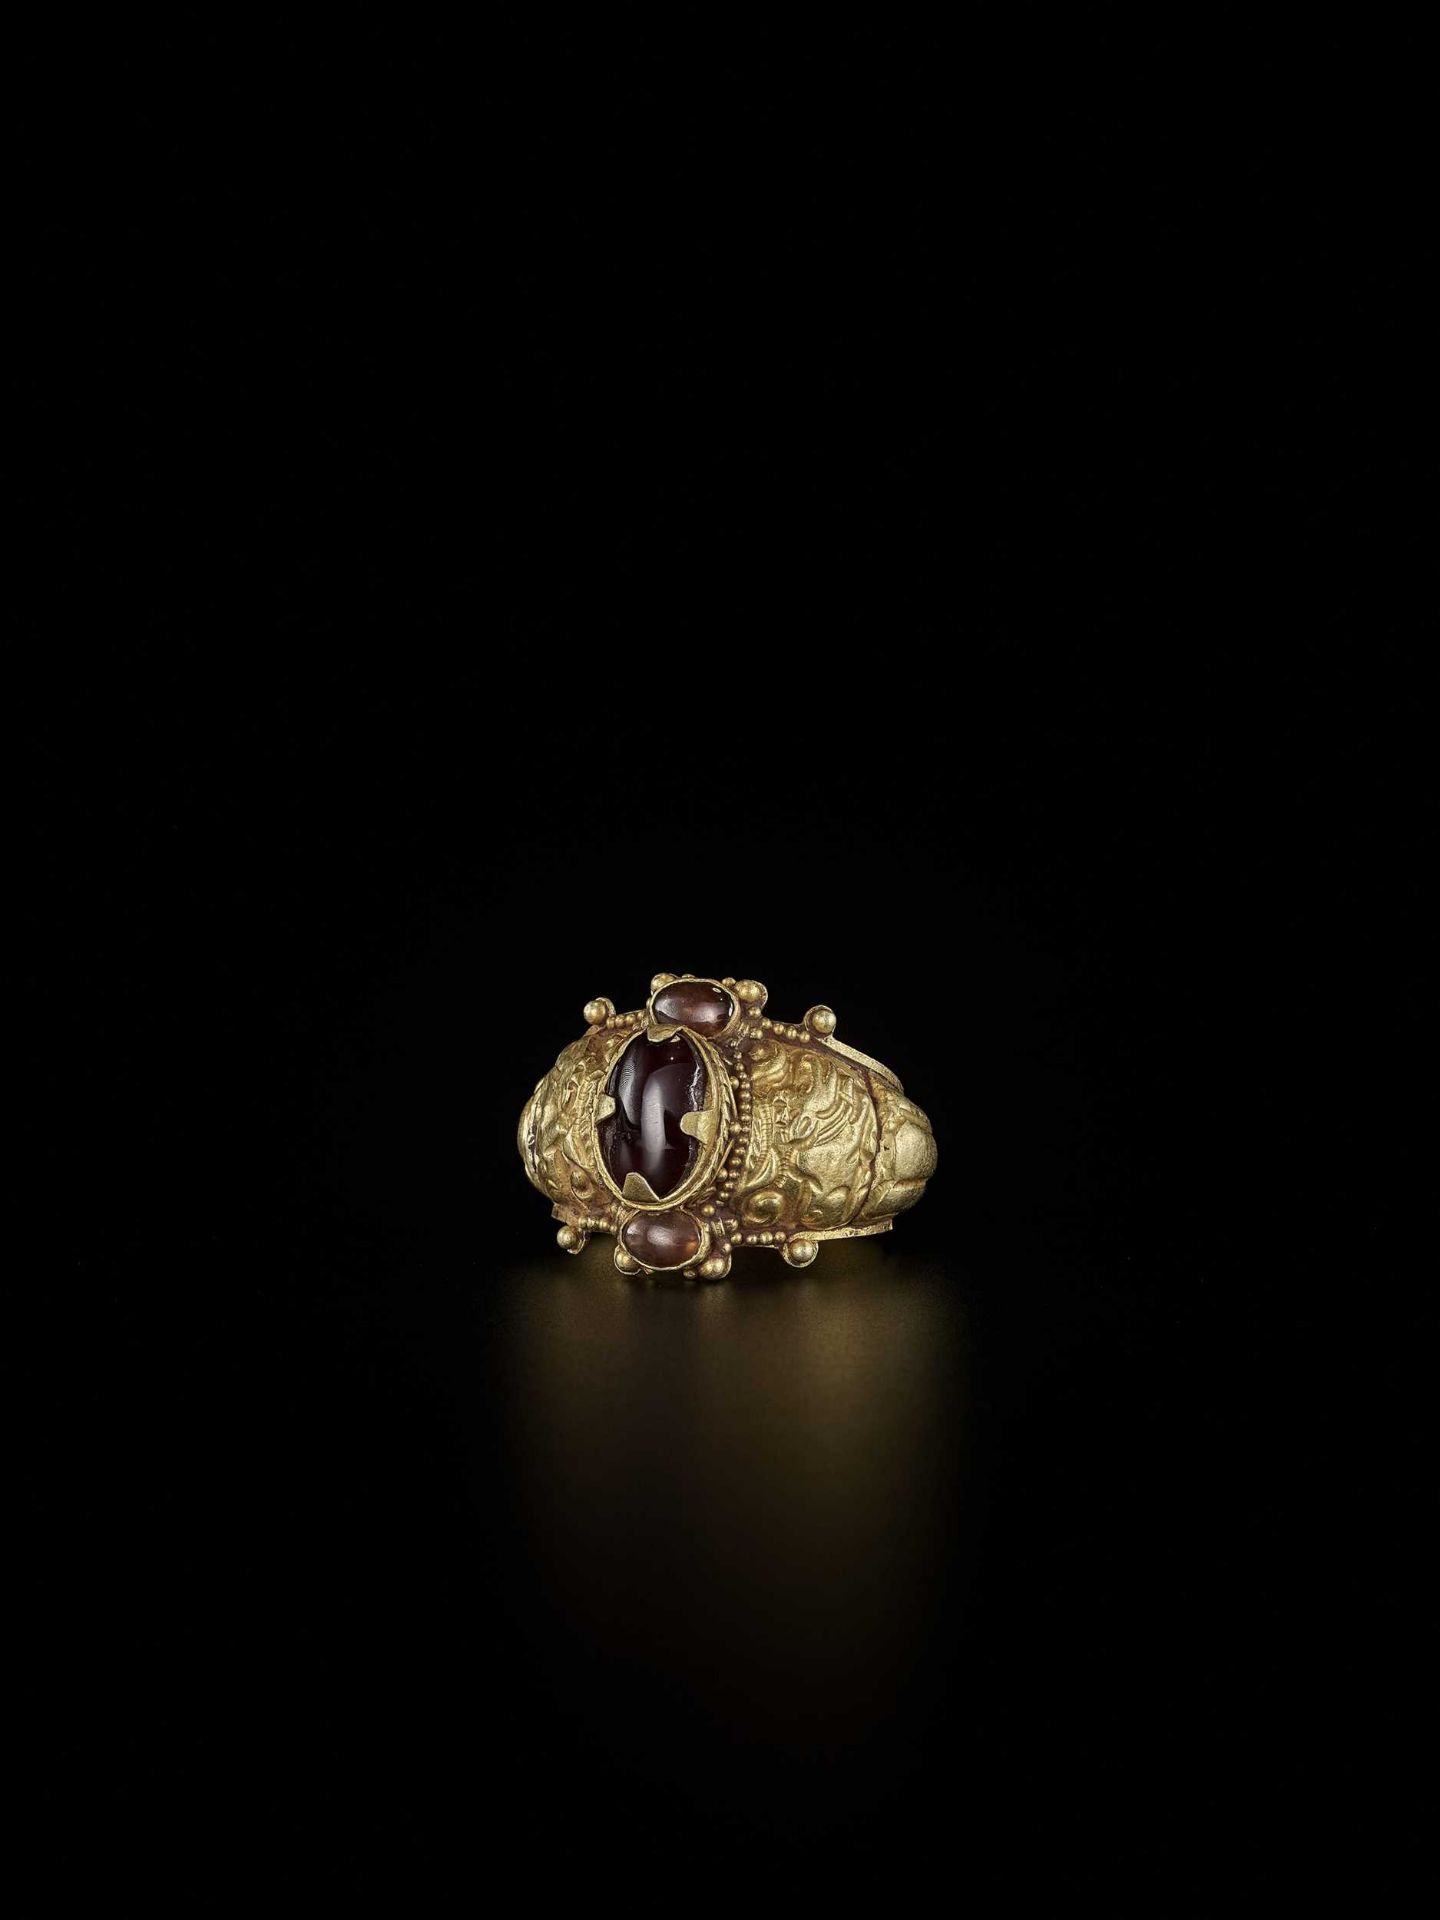 A CHAM AMETHYST AND CRYSTAL-SET GOLD REPOUSSÉ RING WITH NANDI